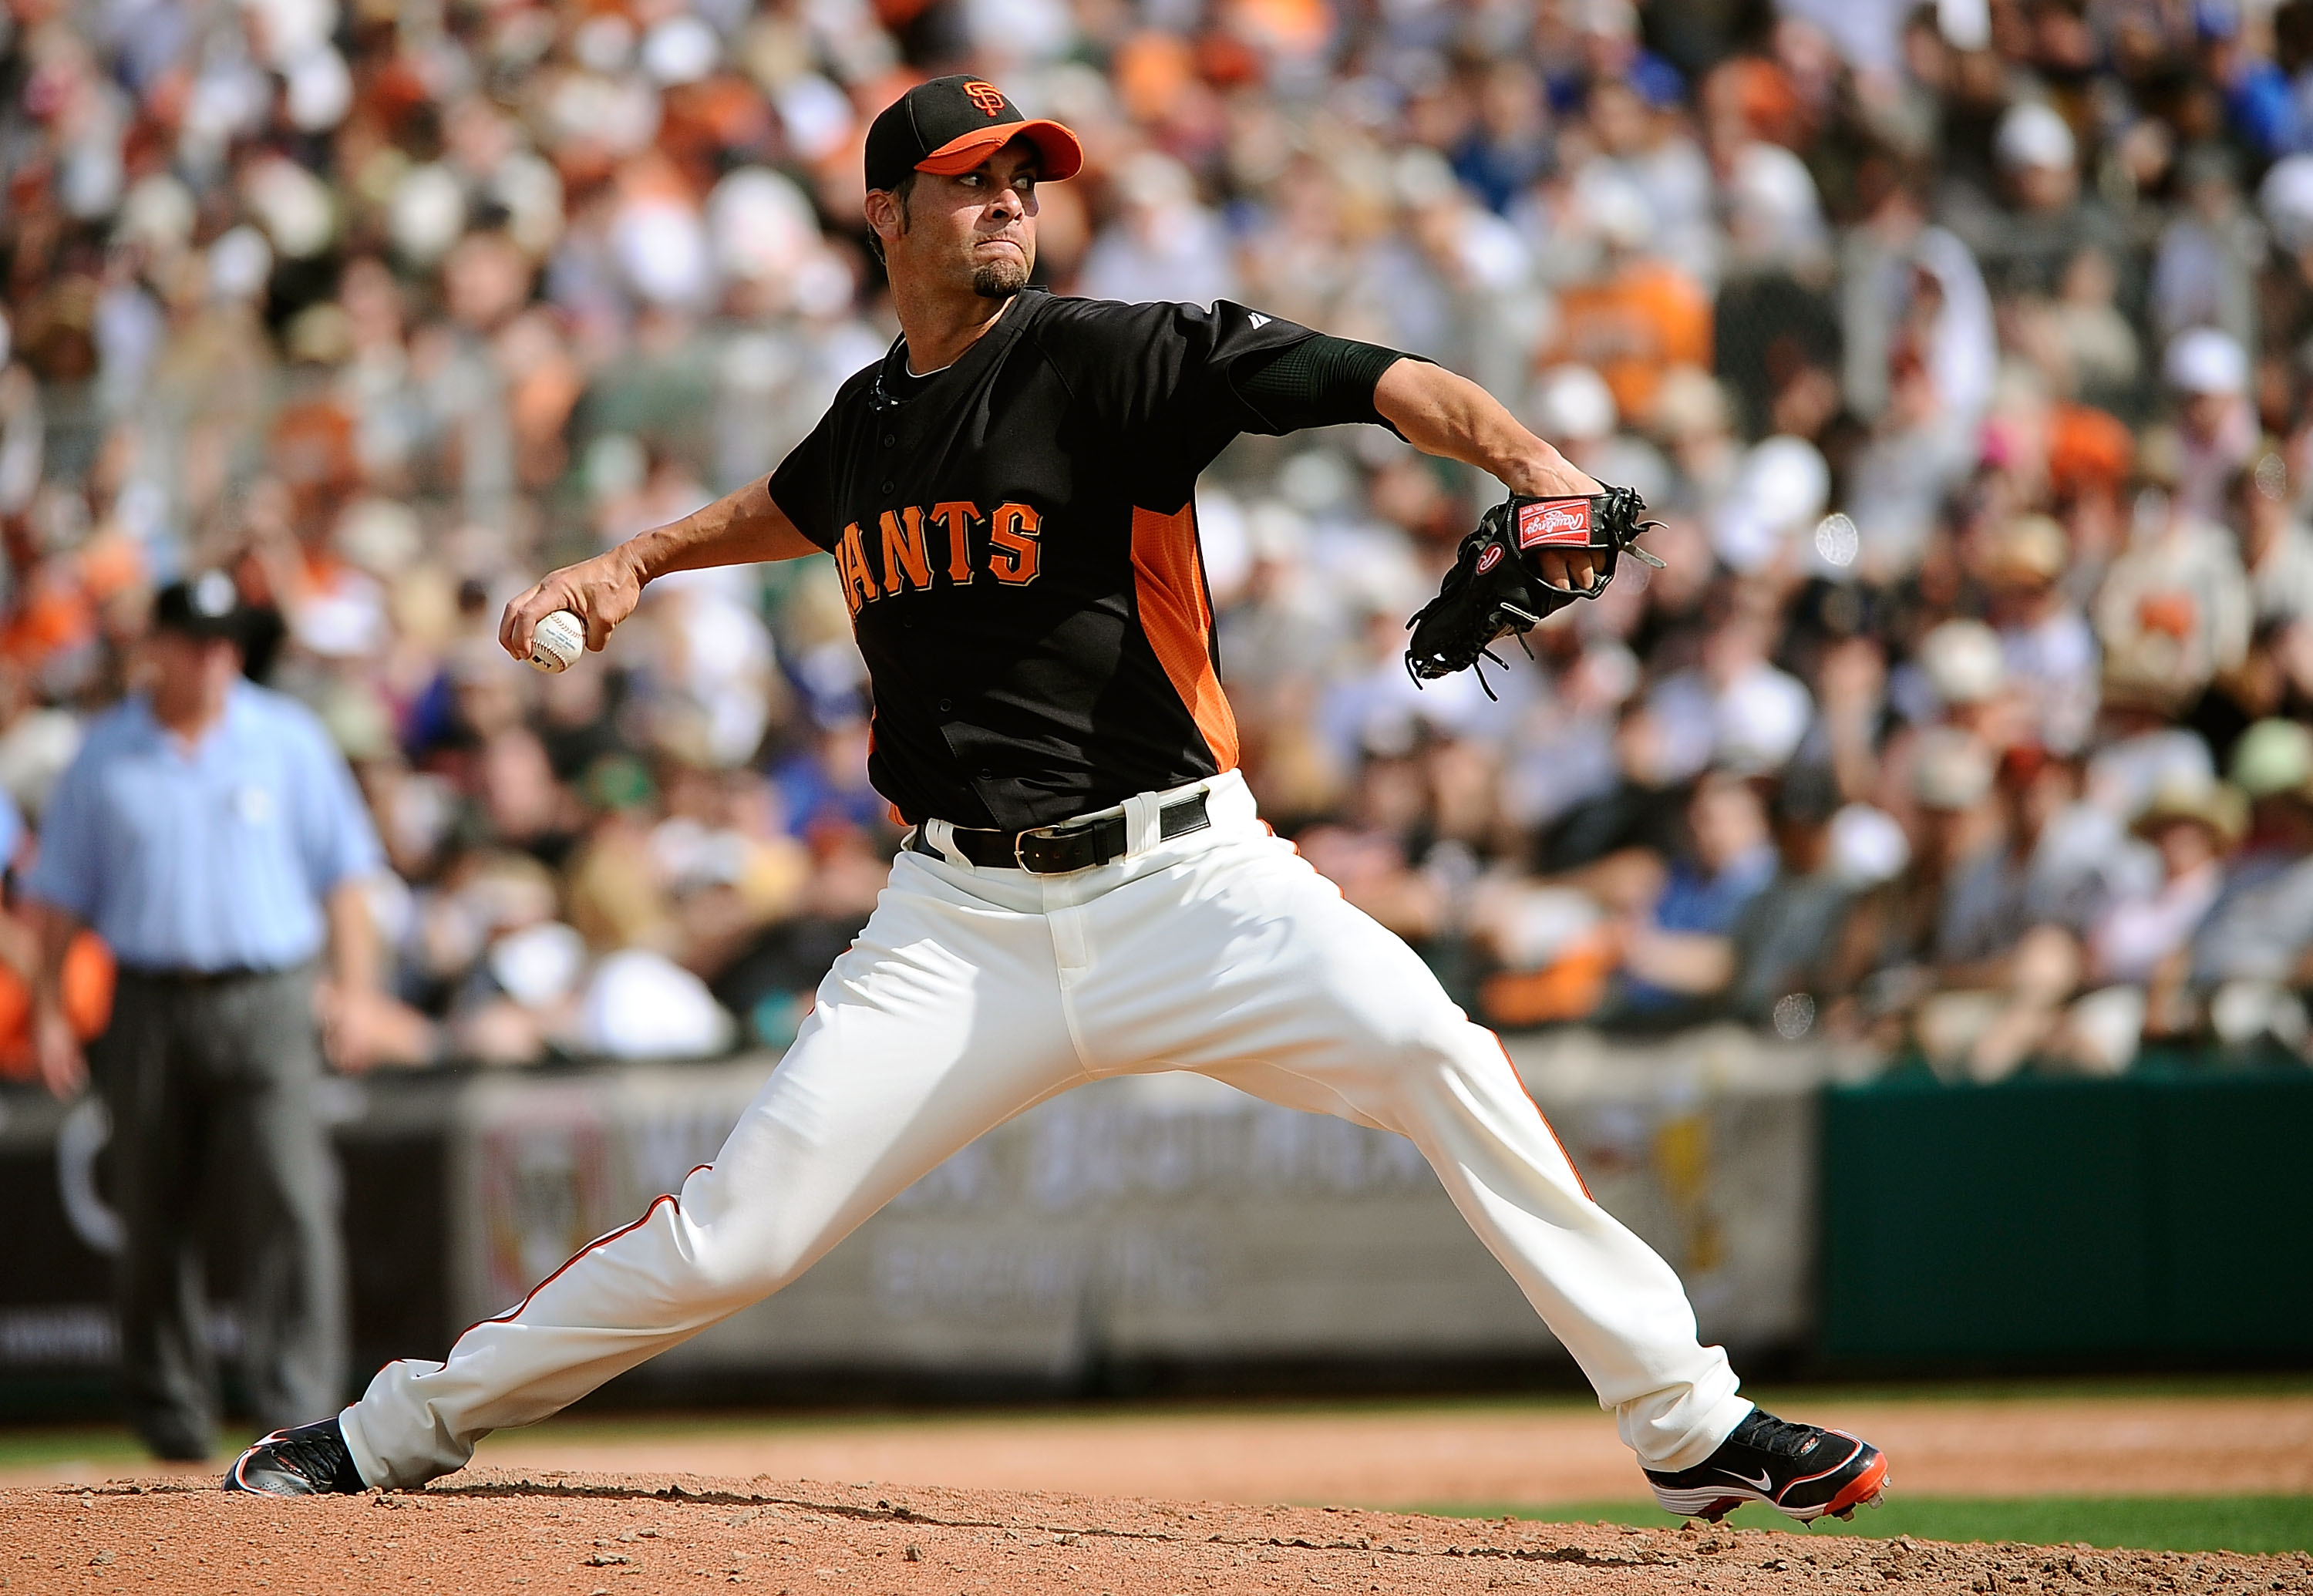 SCOTTSDALE, AZ - MARCH 18:  Ryan Vogelsong #32 of the San Francisco Giants pitches during the spring training baseball game against the Los Angeles Dodgers at Scottsdale Stadium on March 18, 2011 in Scottsdale, Arizona.  (Photo by Kevork Djansezian/Getty